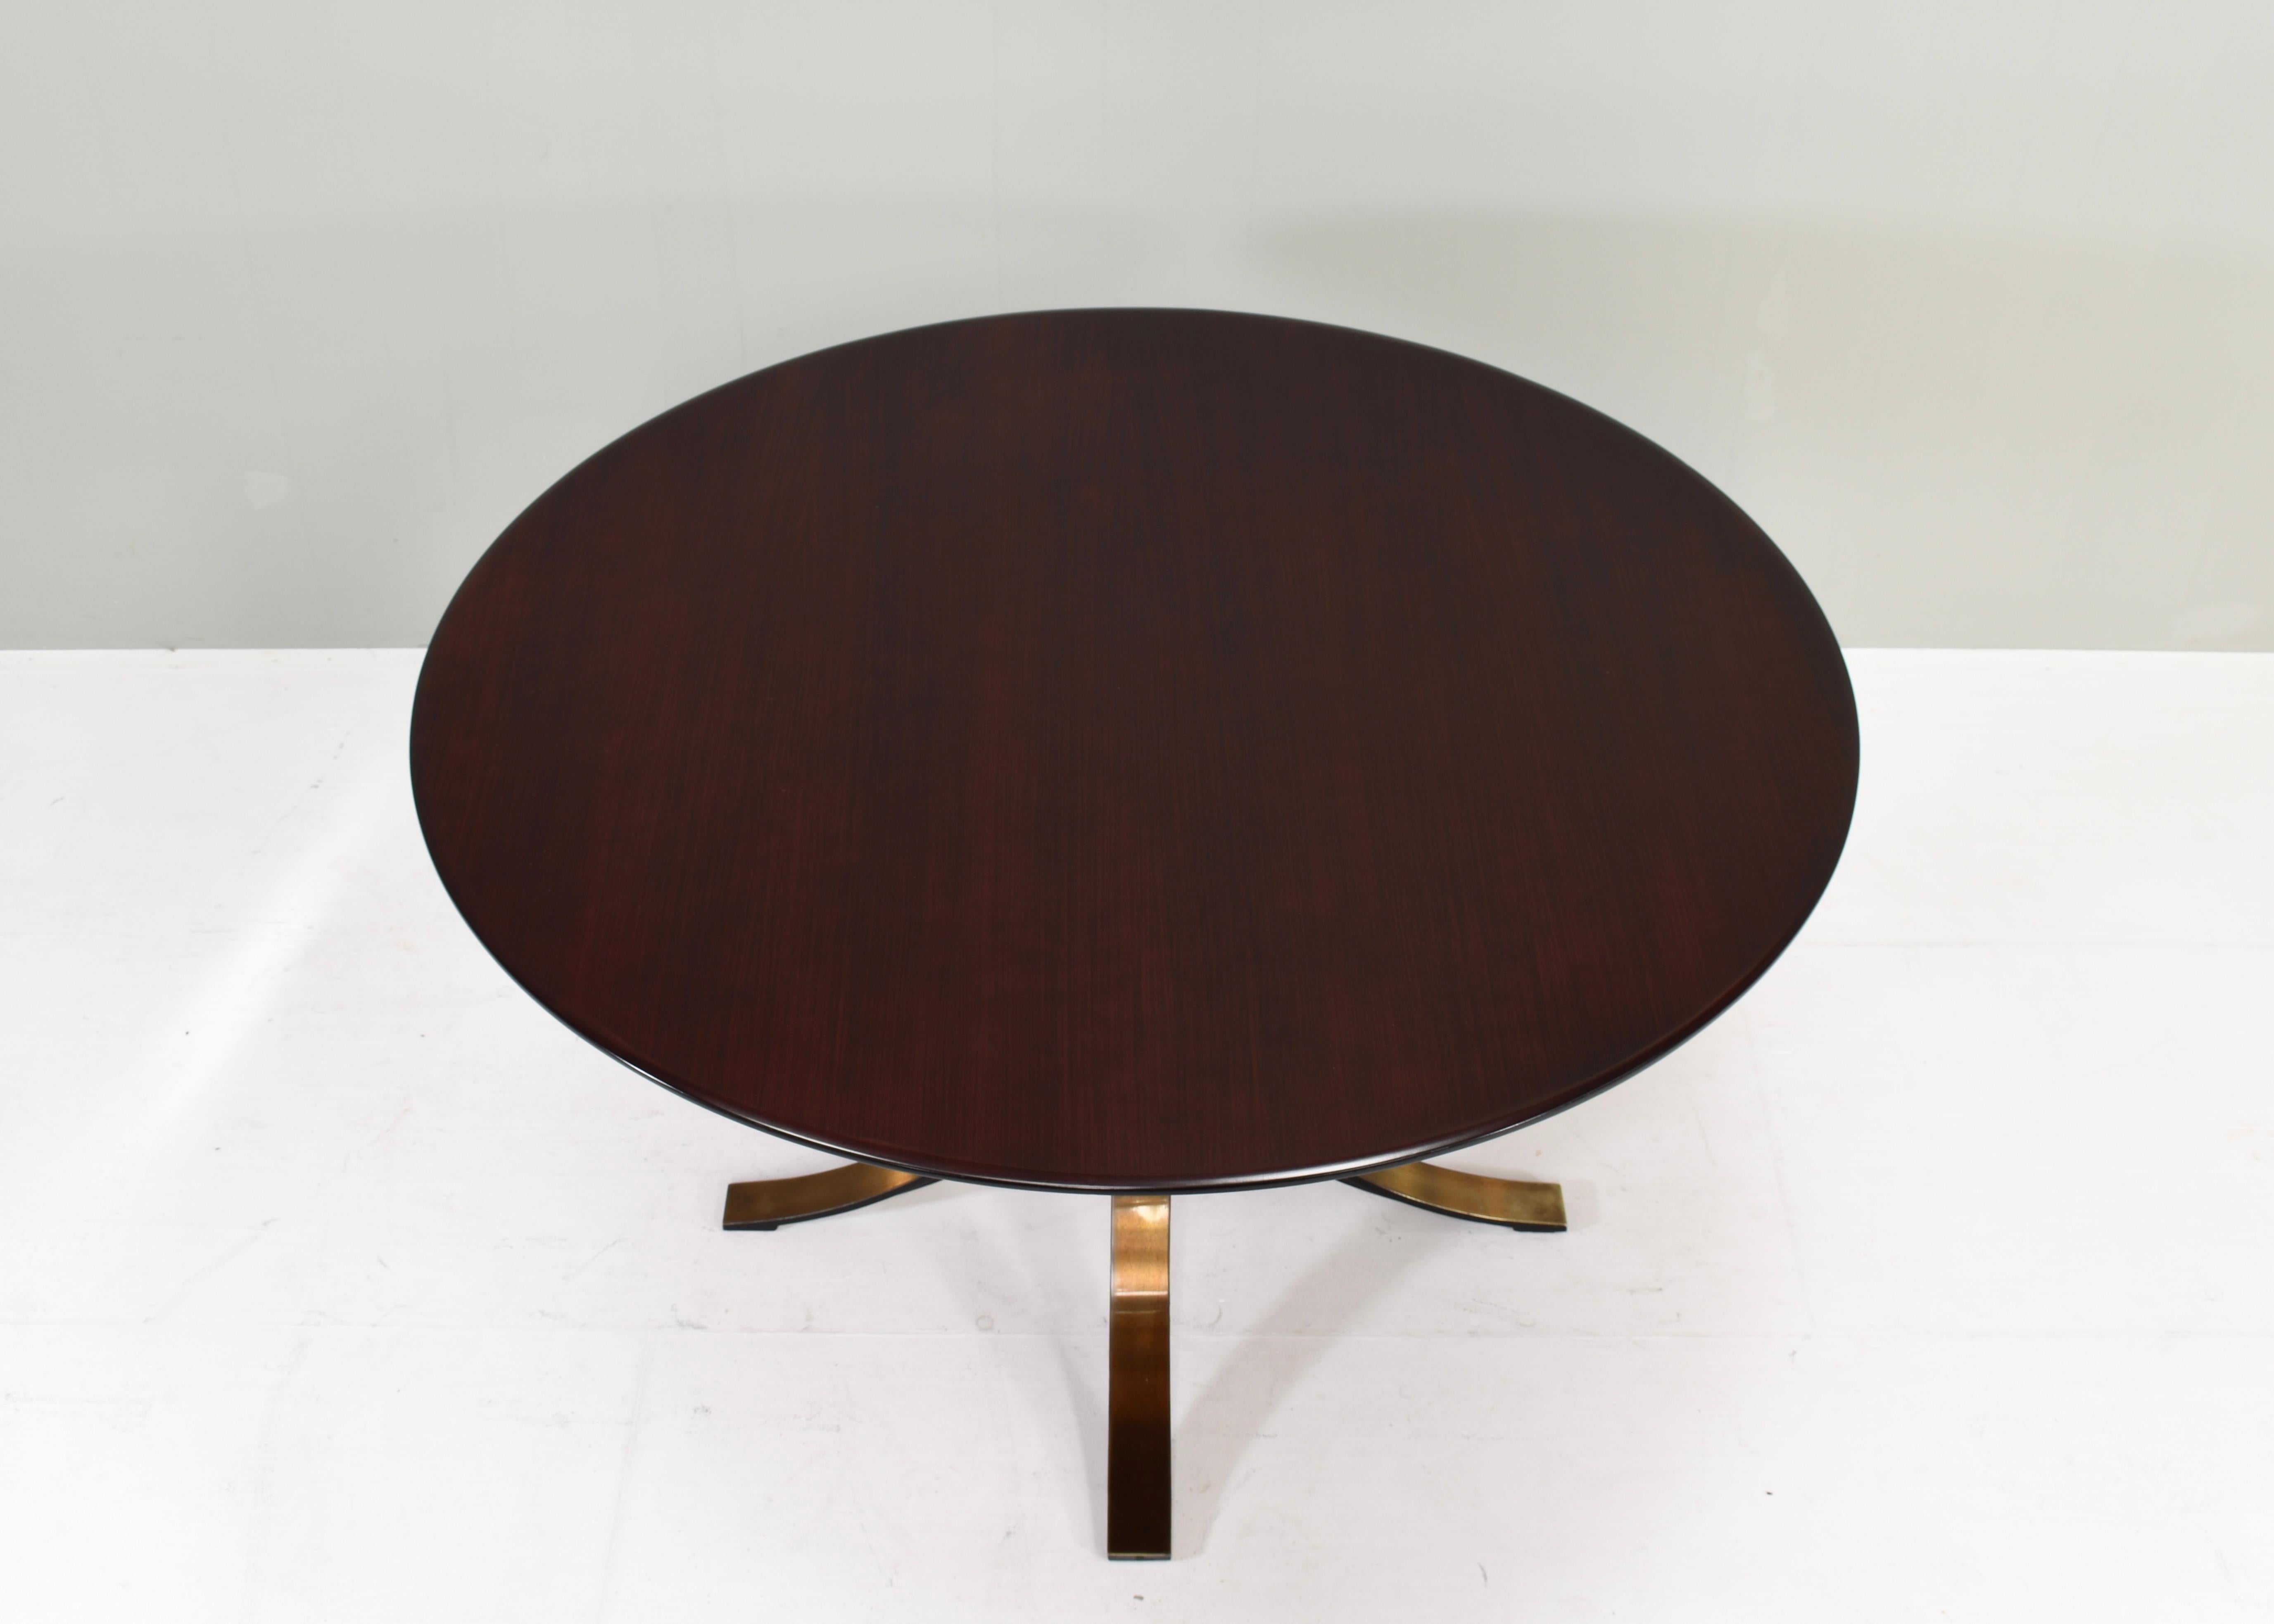 Osvaldo Borsani T69 Round Dining Table by Tecno, Italy, circa 1960 In Good Condition For Sale In Pijnacker, Zuid-Holland